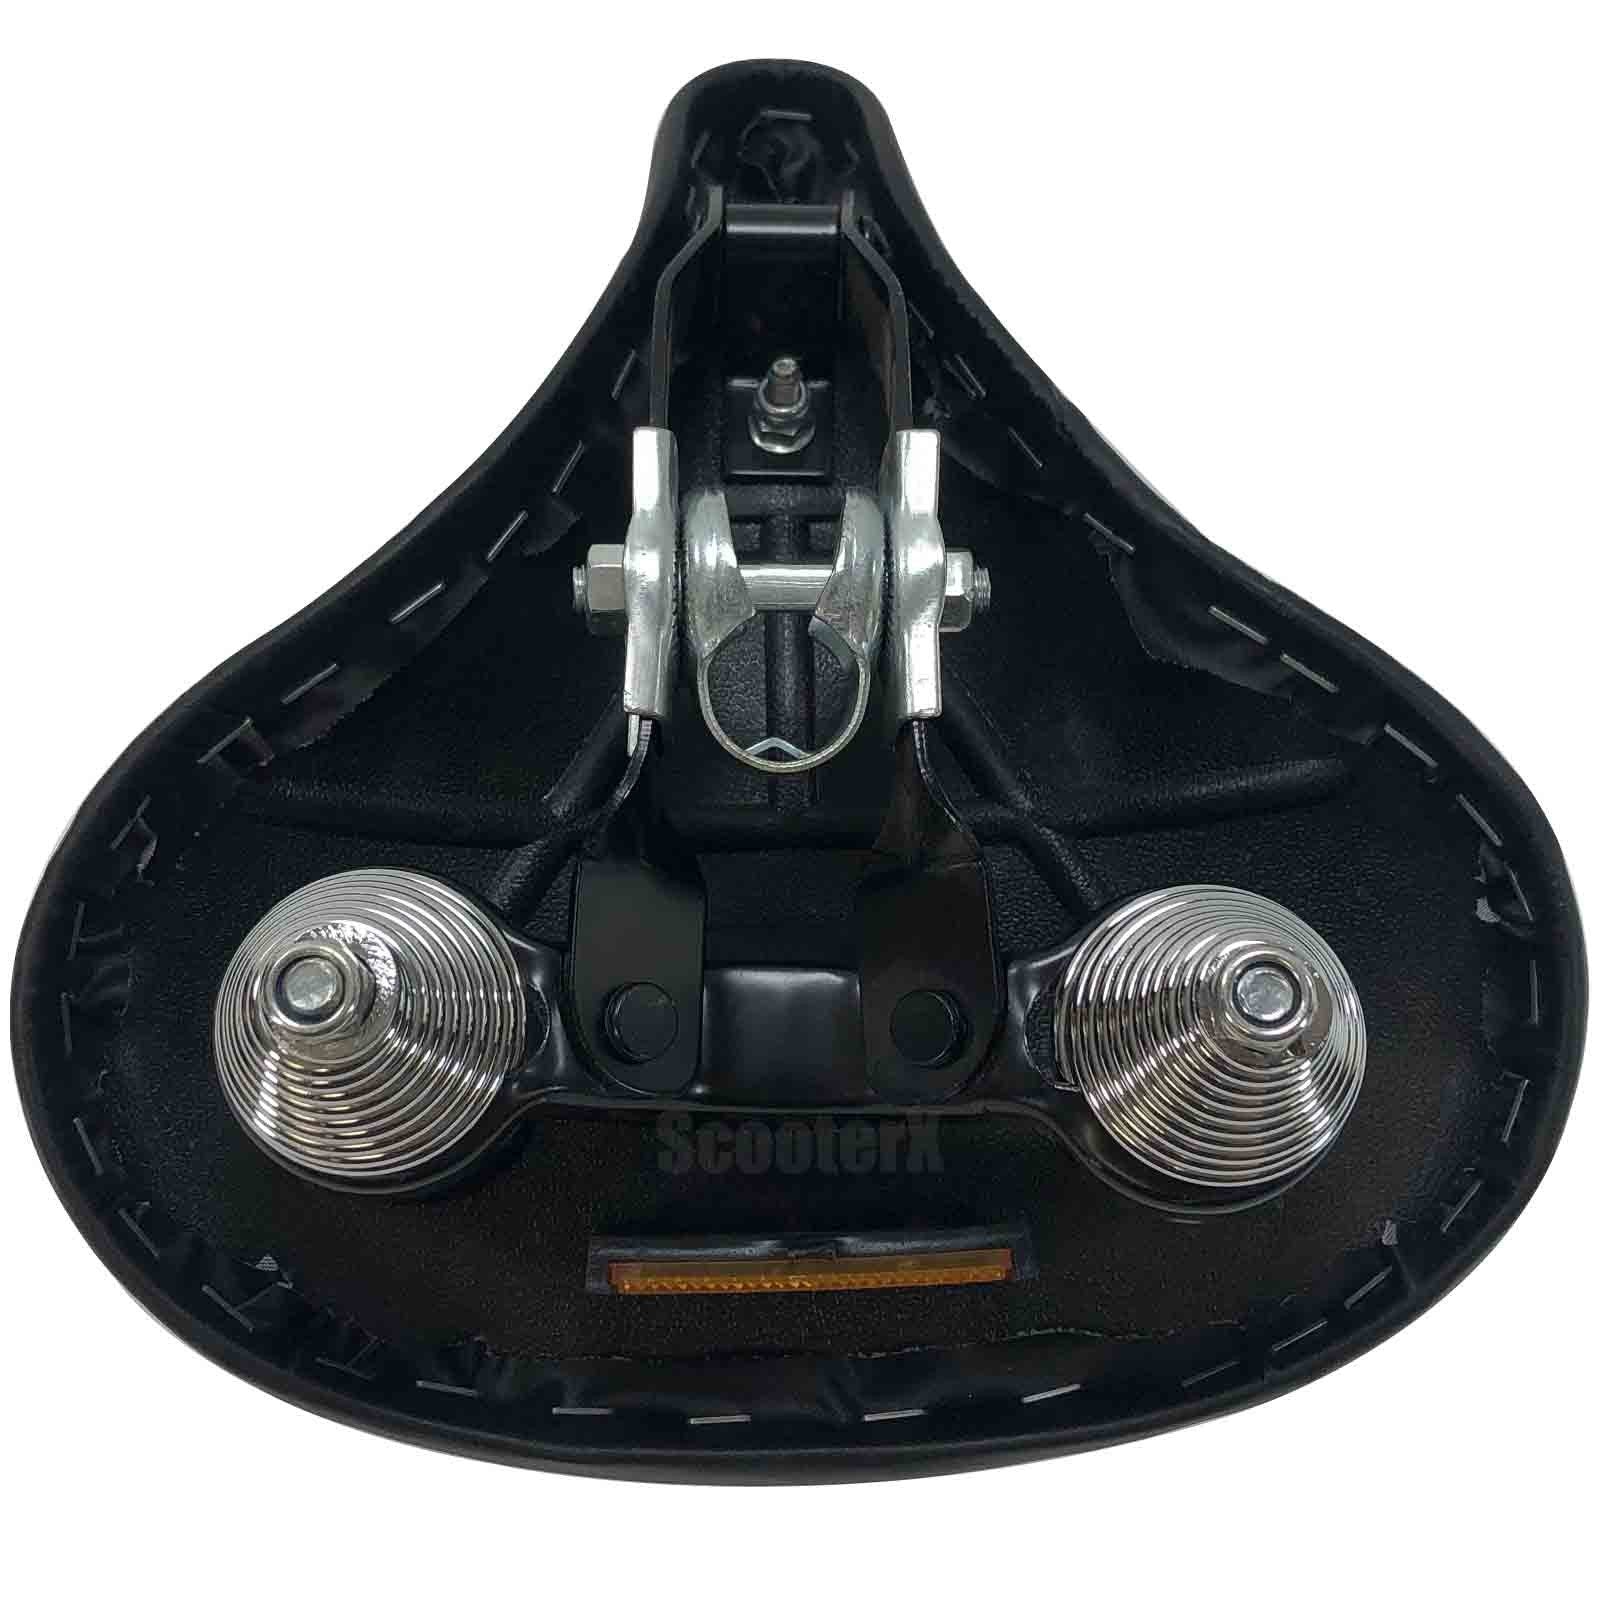 ScooterX SEAT KIT For Dirt Dog Gas Scooter